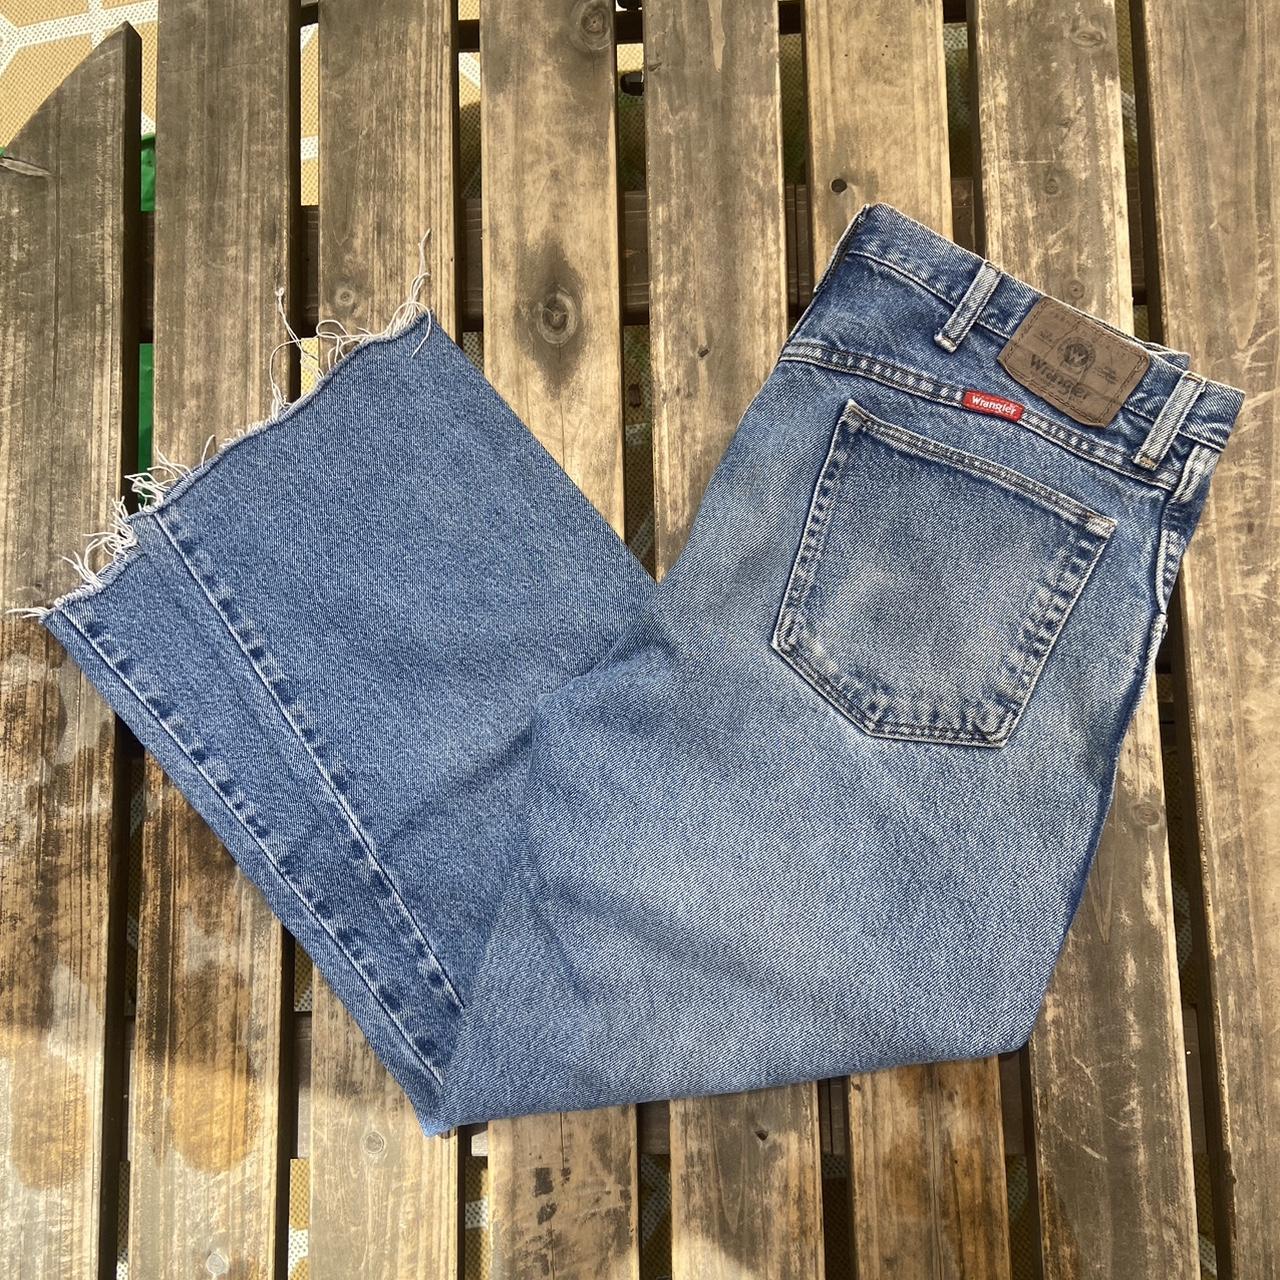 Wrangler Distressed Jeans Size - 36 x 30 Condition -... - Depop